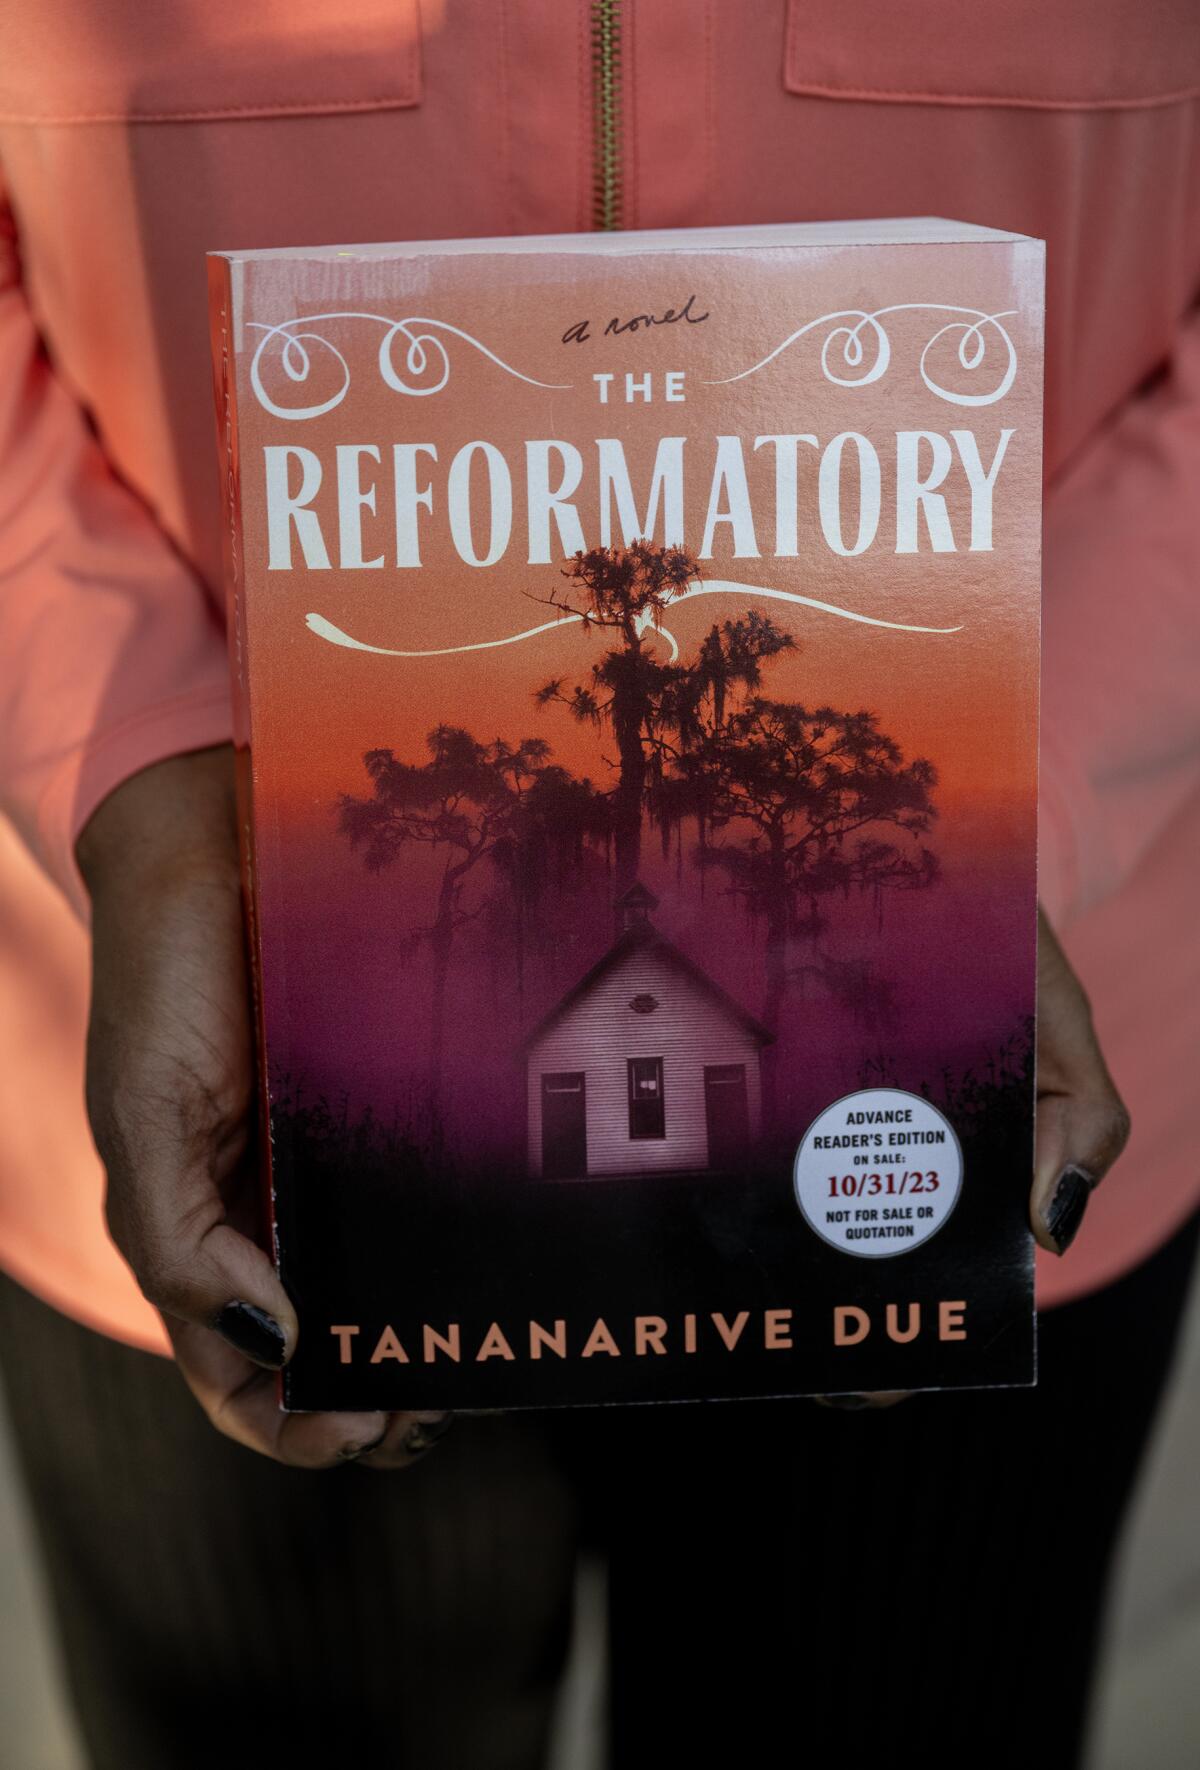 Author Tananarive Due's new book about a Florida Black reform school is called "The Reformatory."